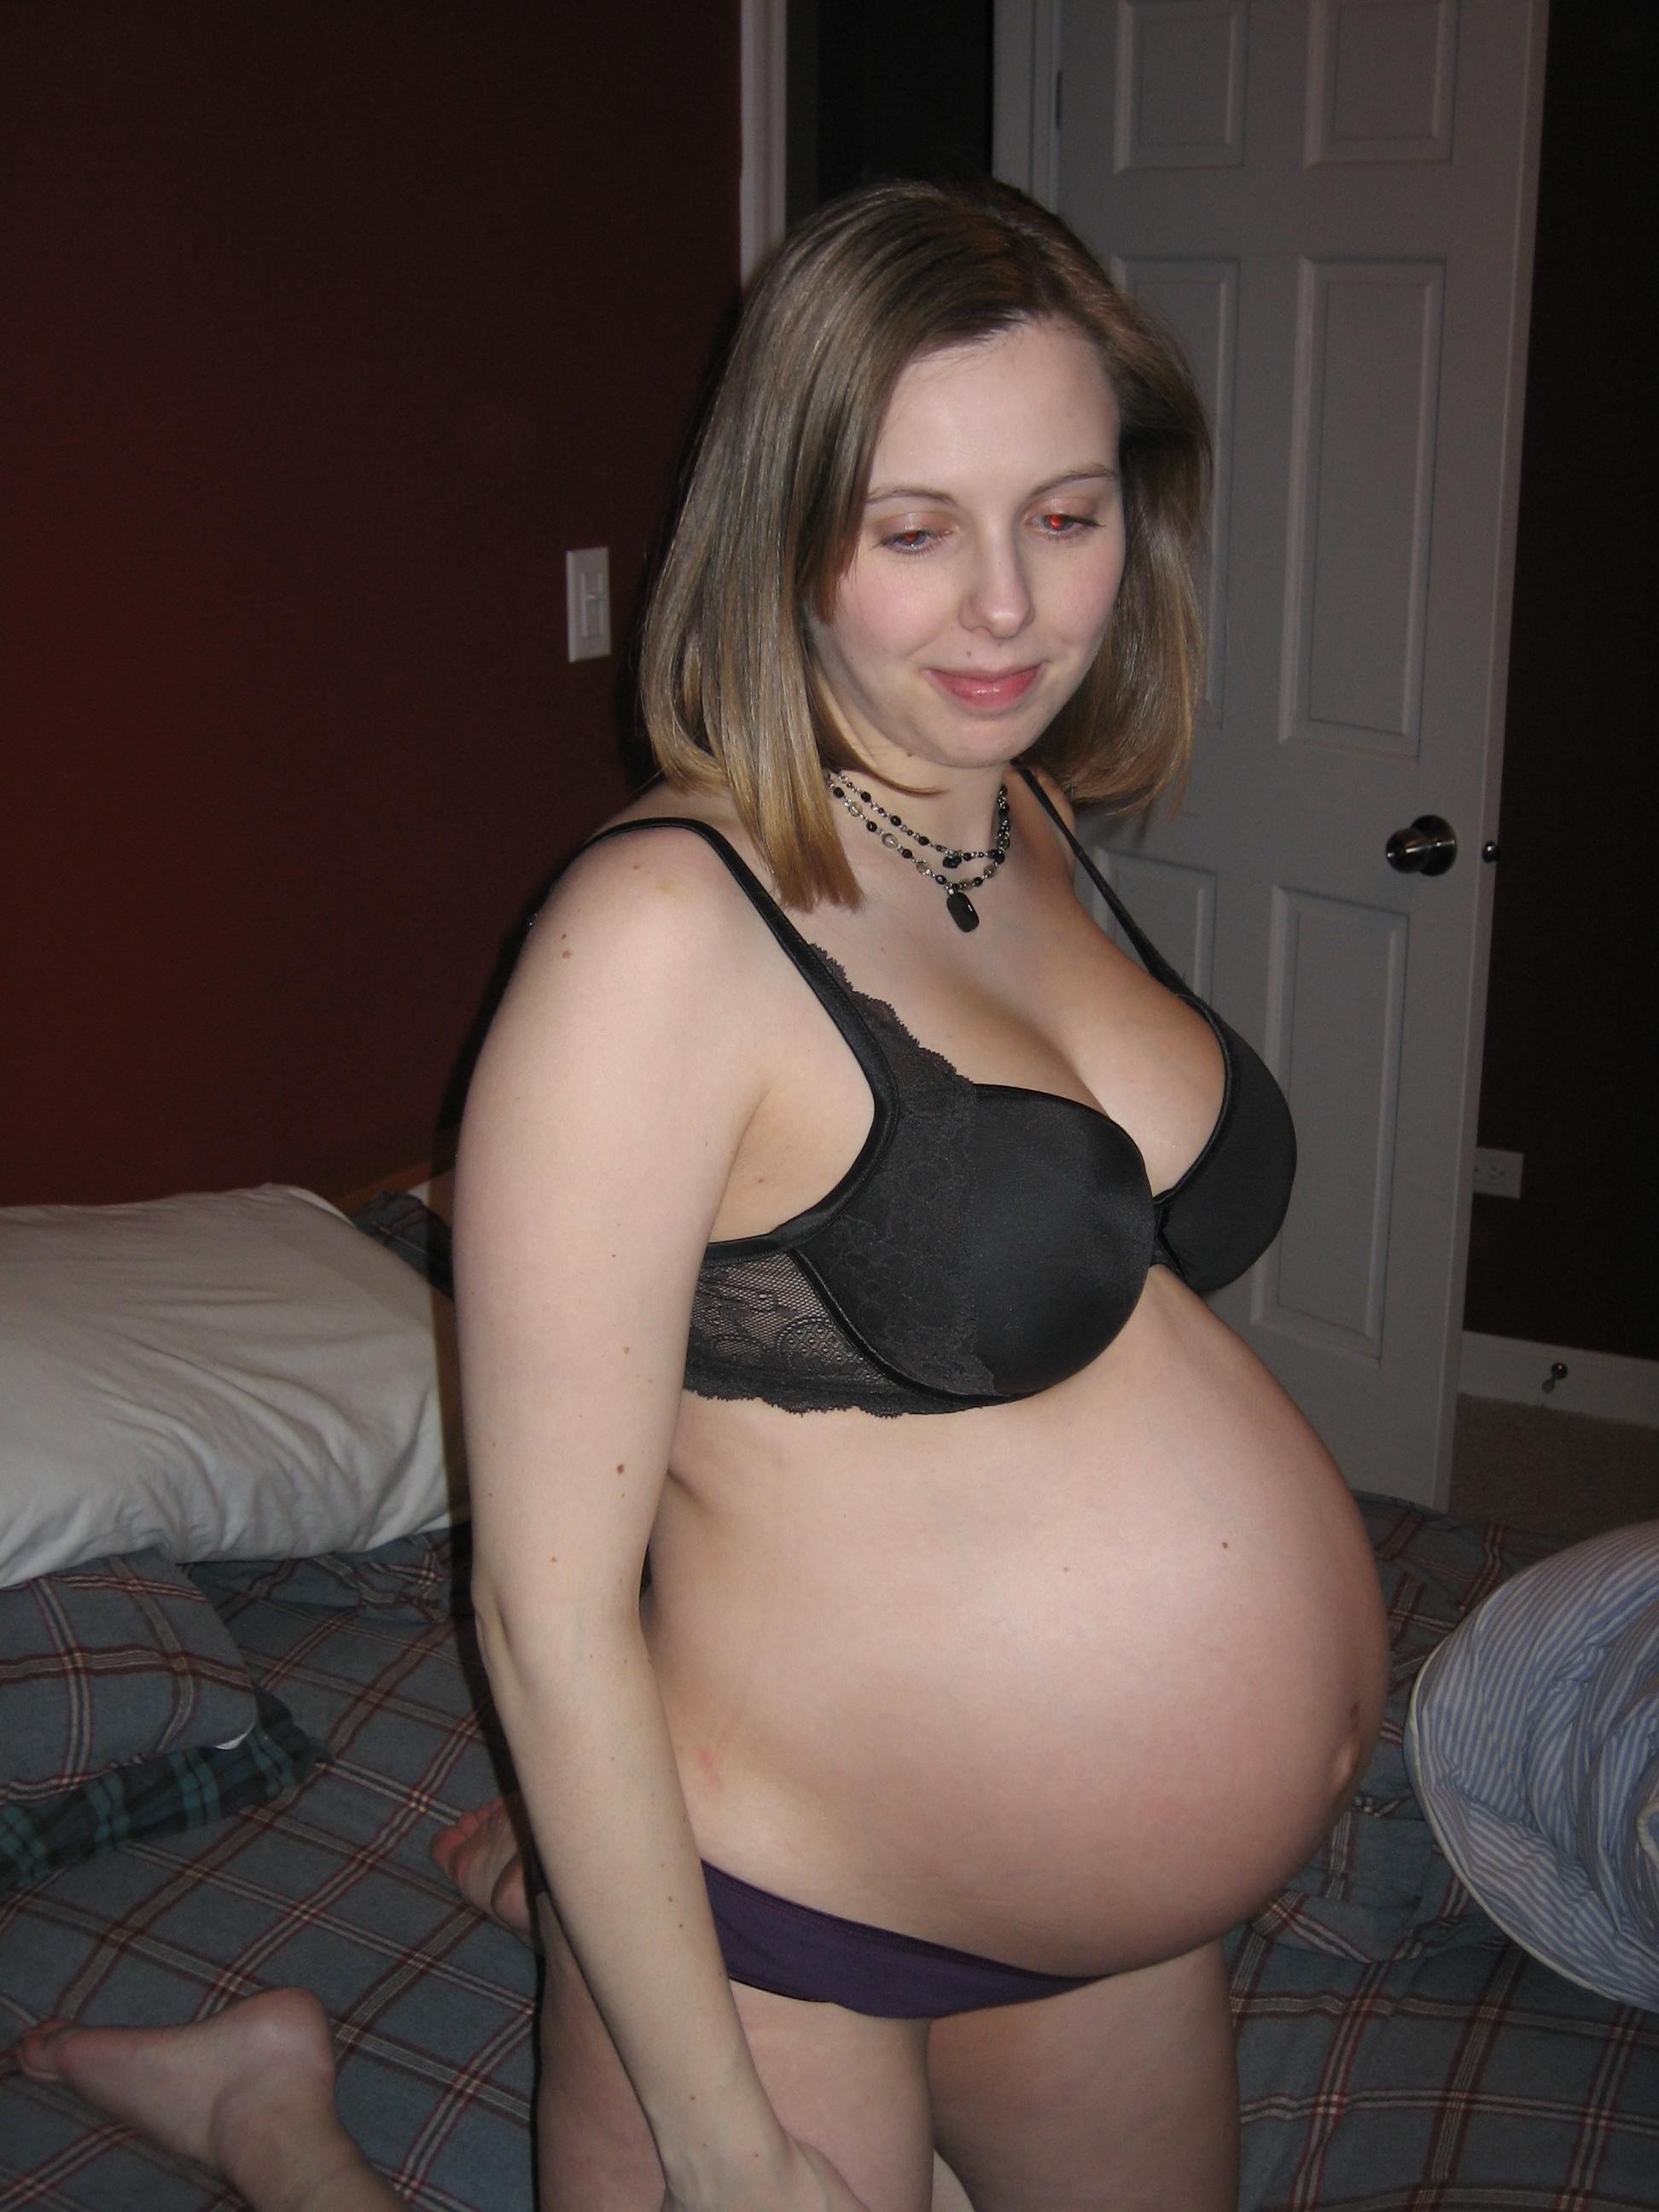 Amateur Pregnant Mature Wife with Tramp Stamp Wearing Pink Panties pic pic